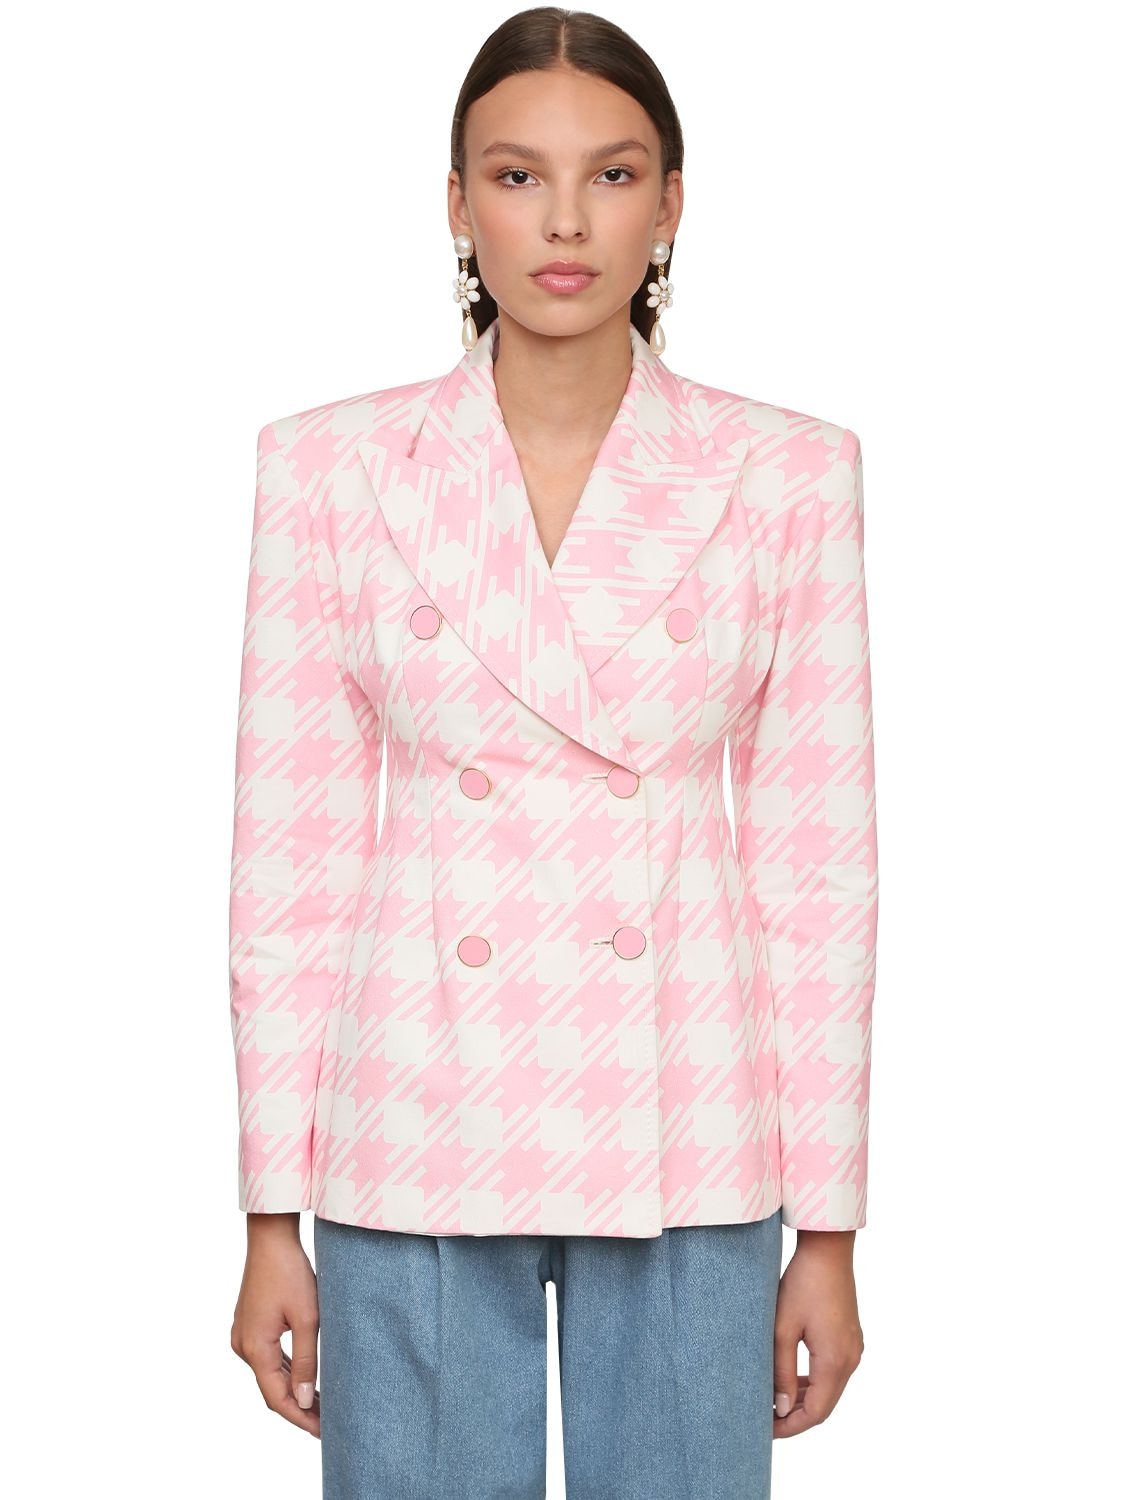 ROWEN ROSE DOUBLE BREASTED COTTON BLAZER,71IF4G001-UELOSW2